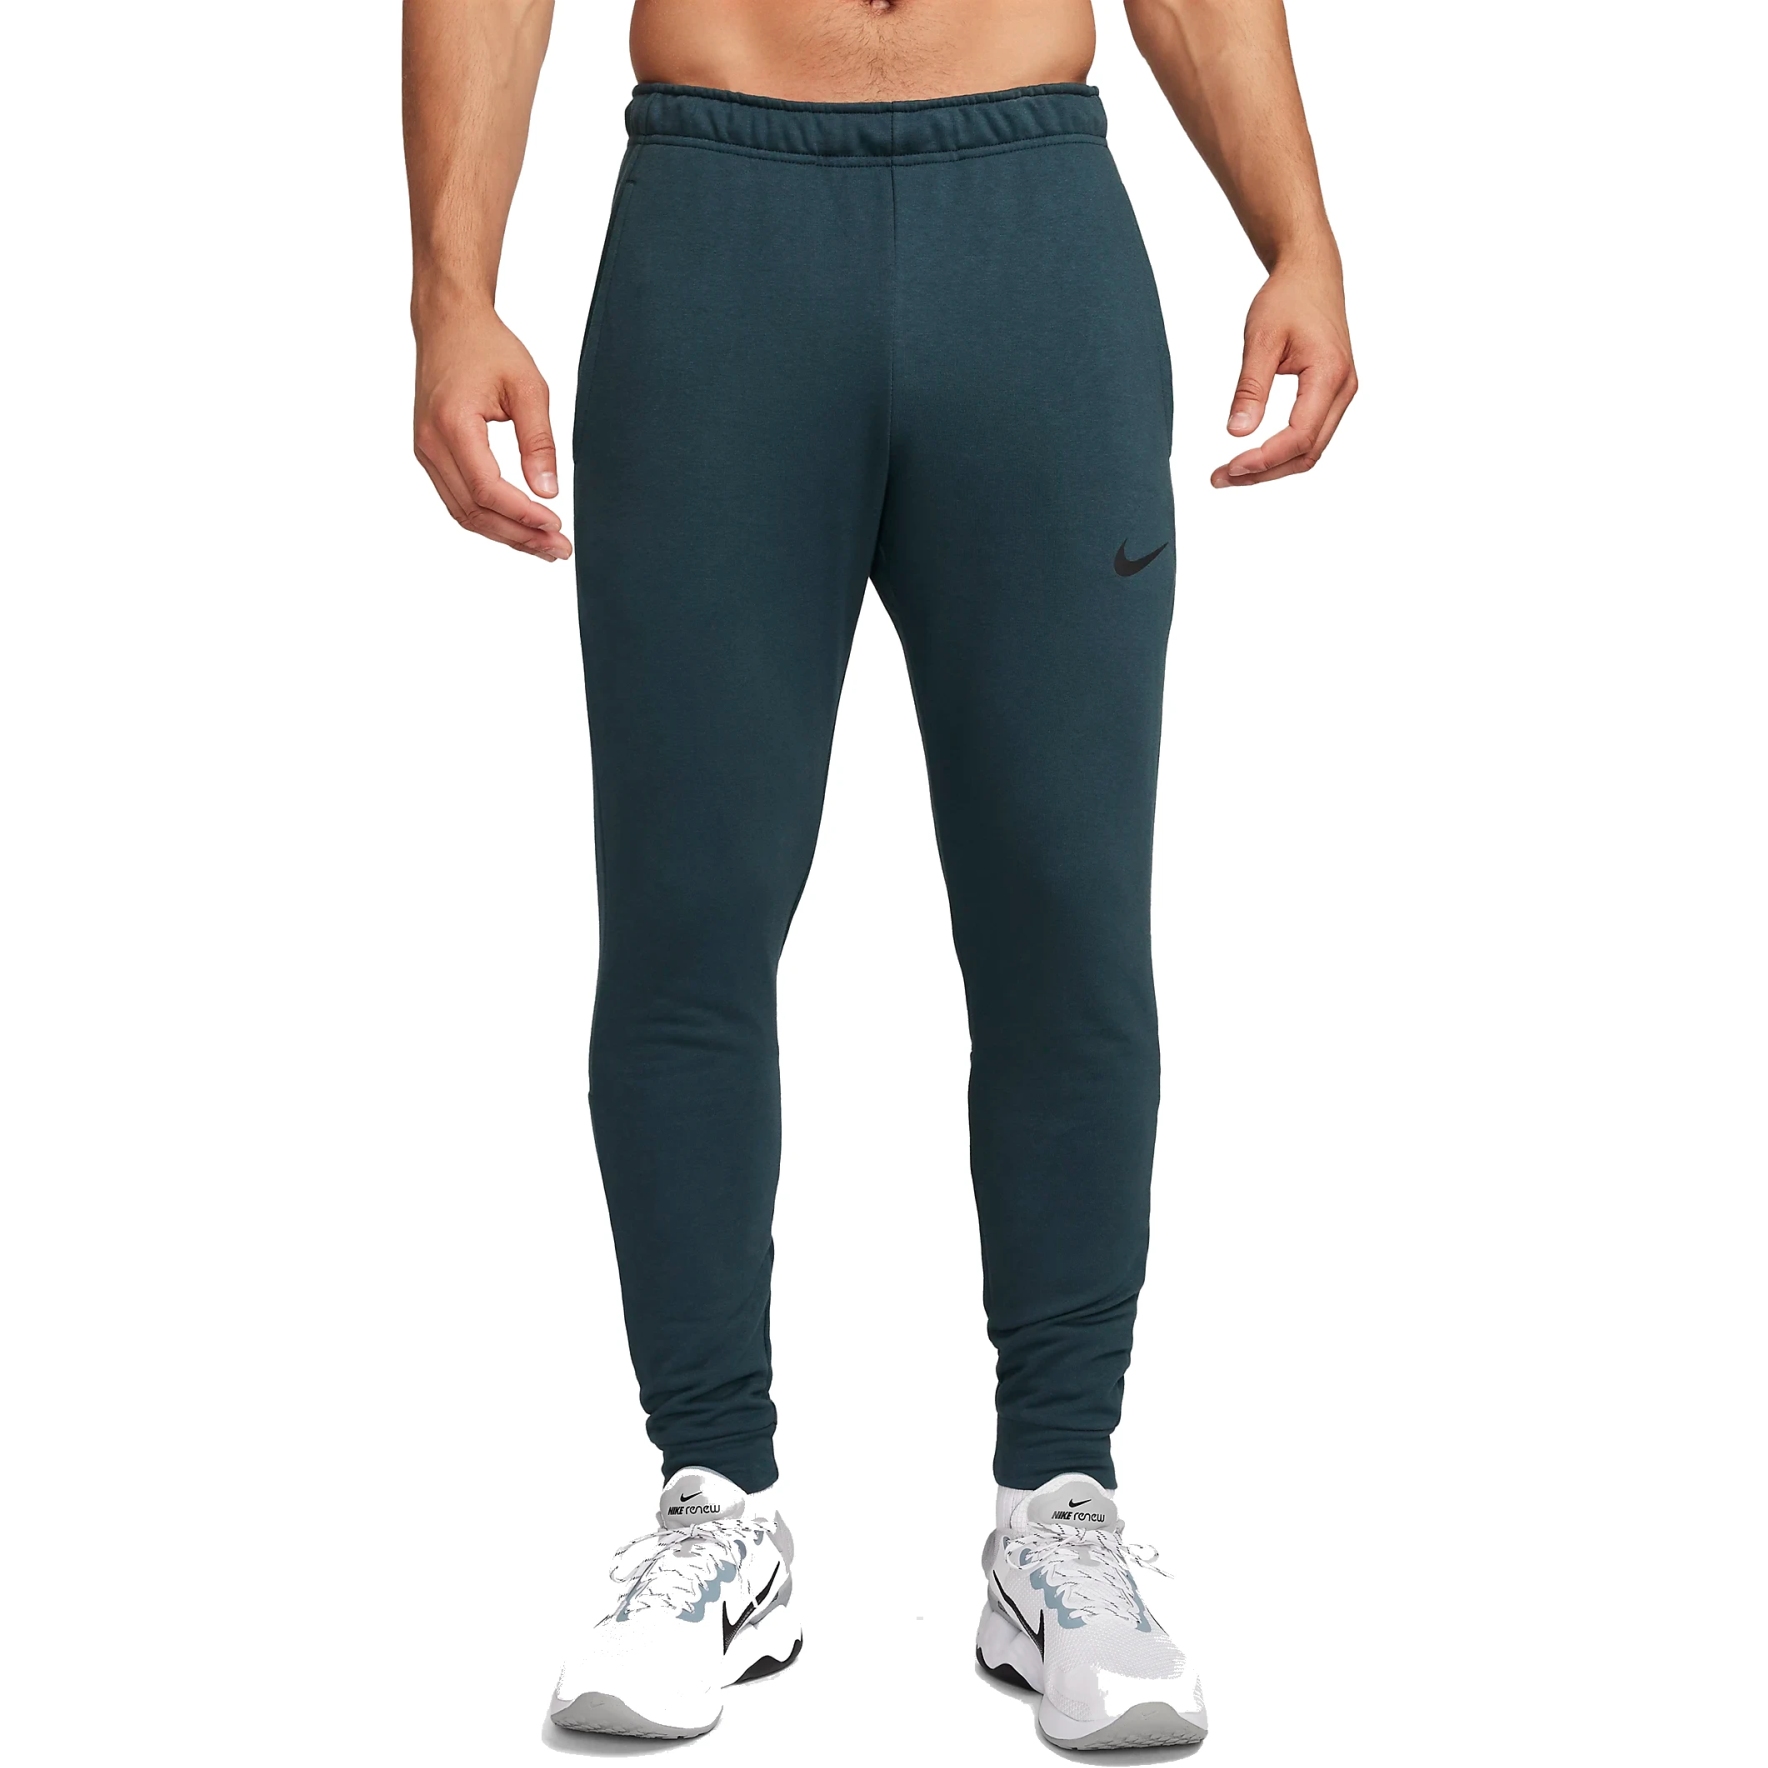 Picture of Nike Dry Tapered Training Pants Men - deep jungle/black CZ6379-328